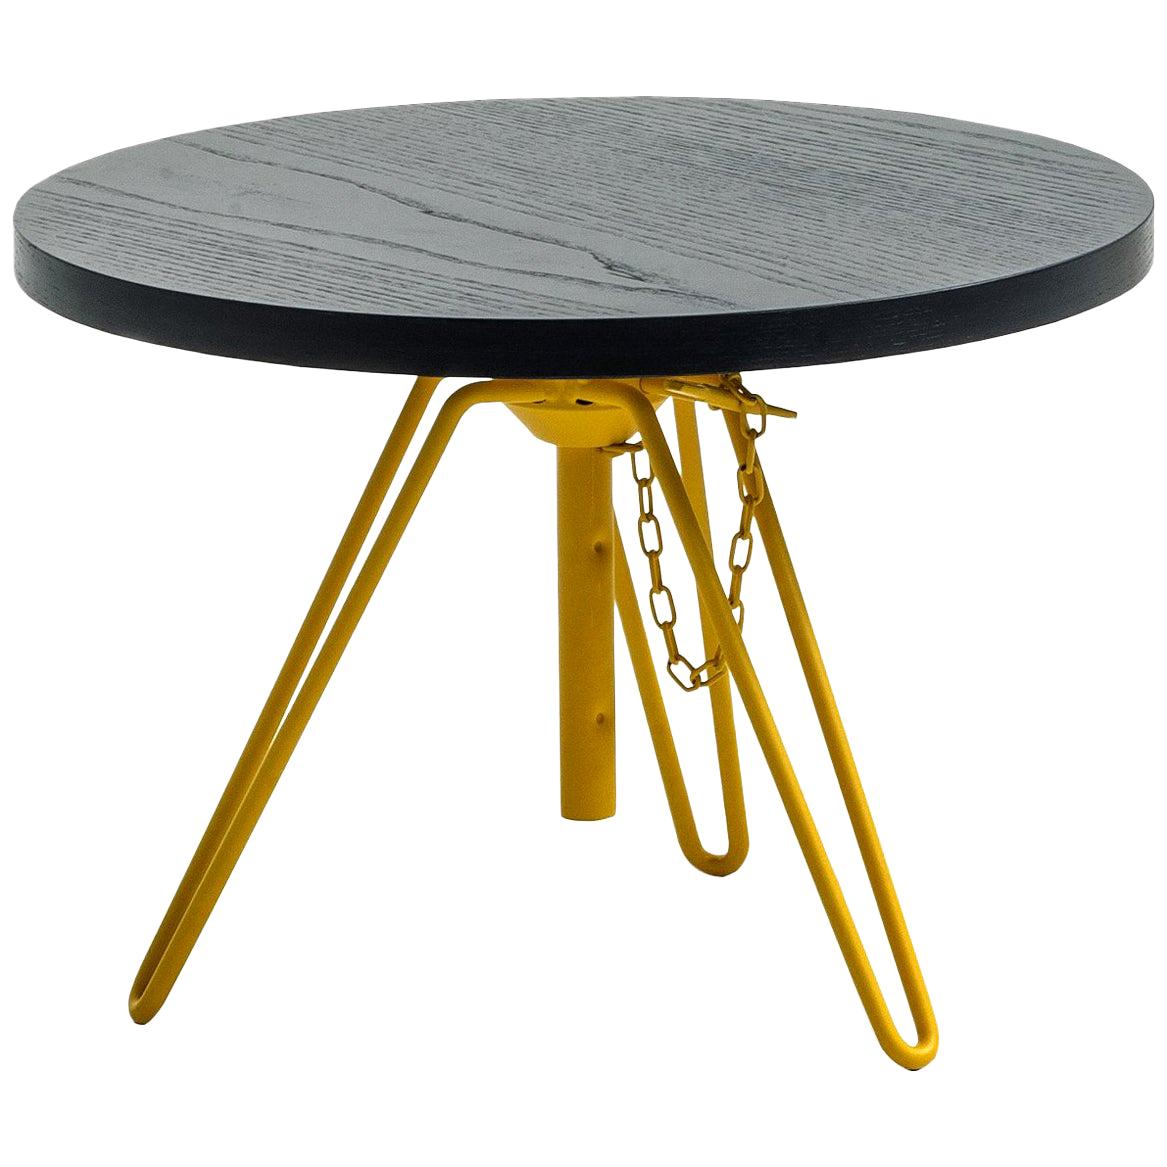 "Overdyed" Aniline Dyed Ash Veneered Top & Steel Side Table by Moroso for Diesel